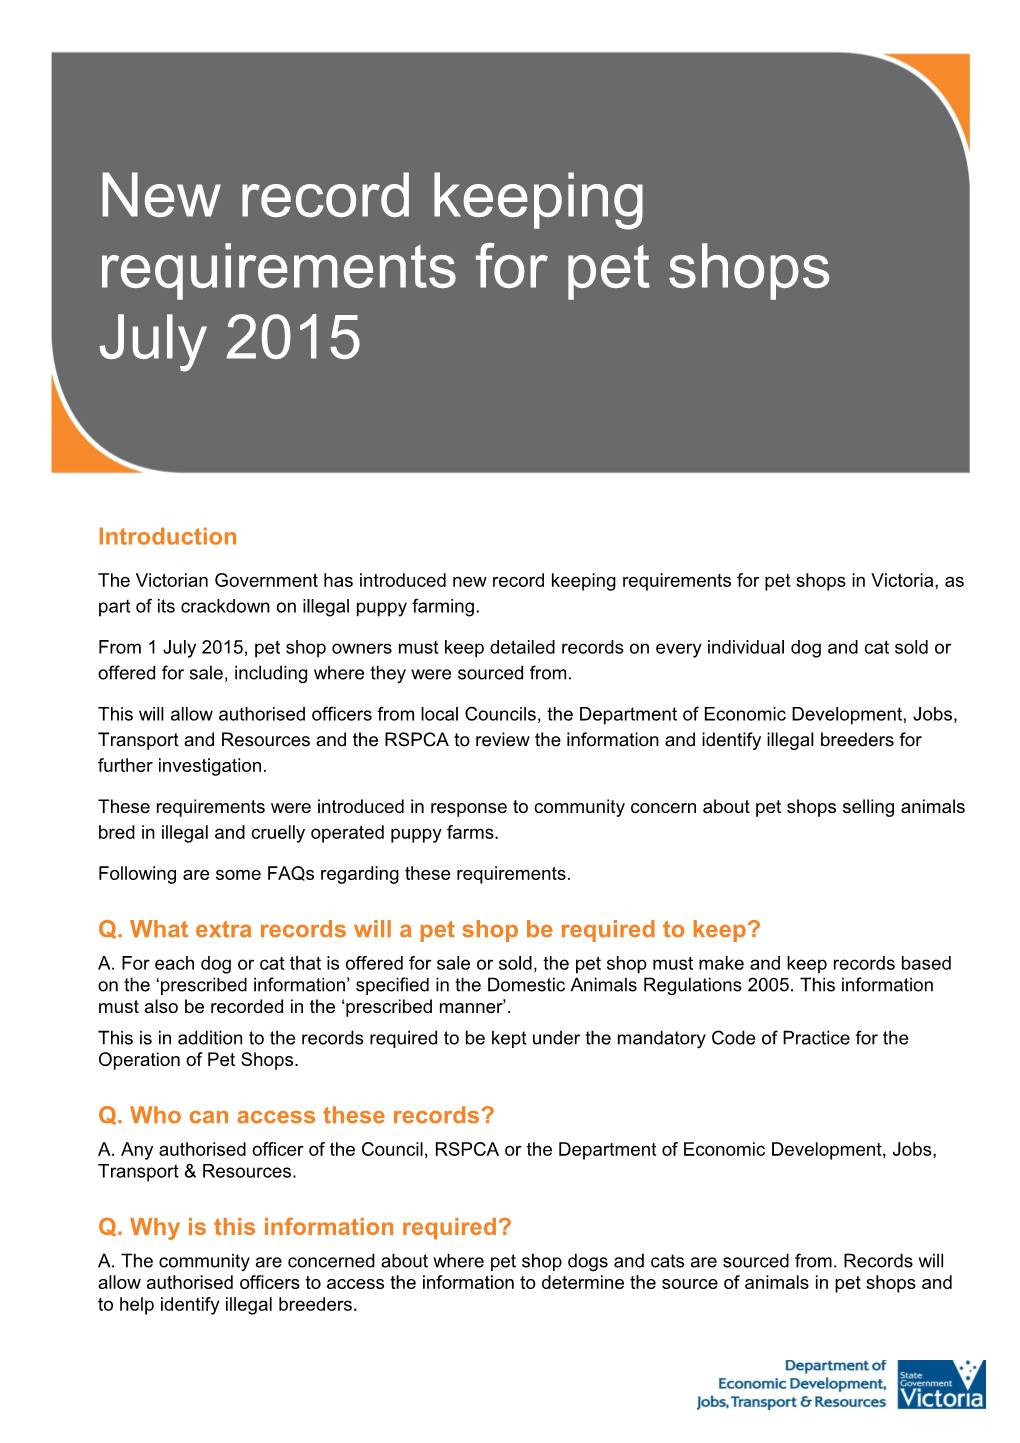 Q. What Extra Records Will a Pet Shop Be Required to Keep?